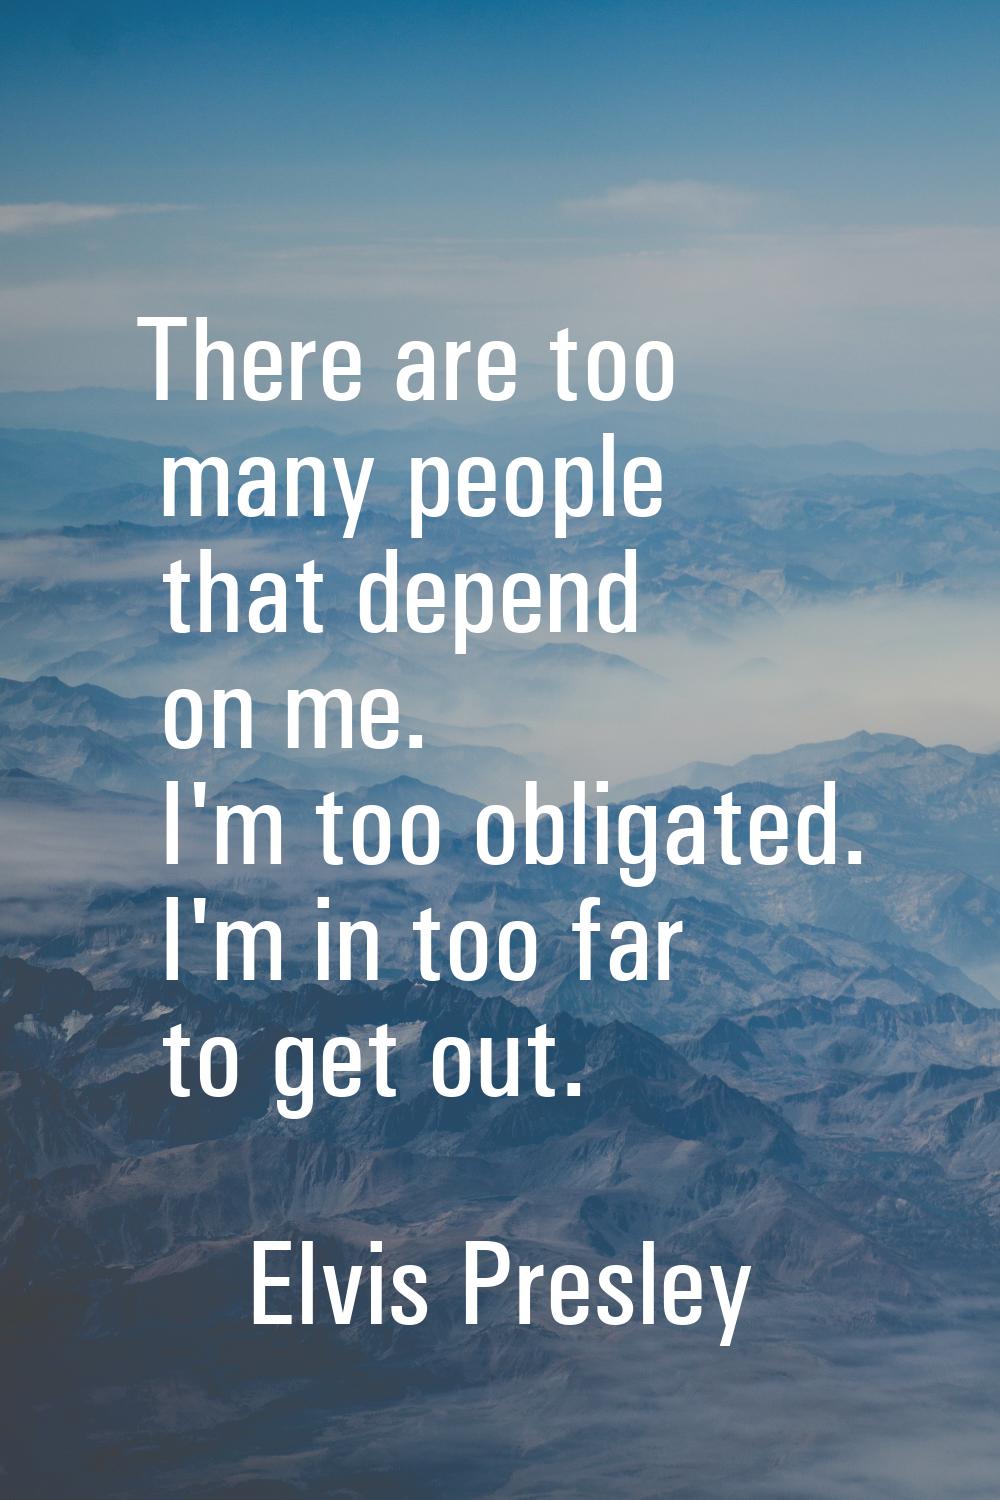 There are too many people that depend on me. I'm too obligated. I'm in too far to get out.